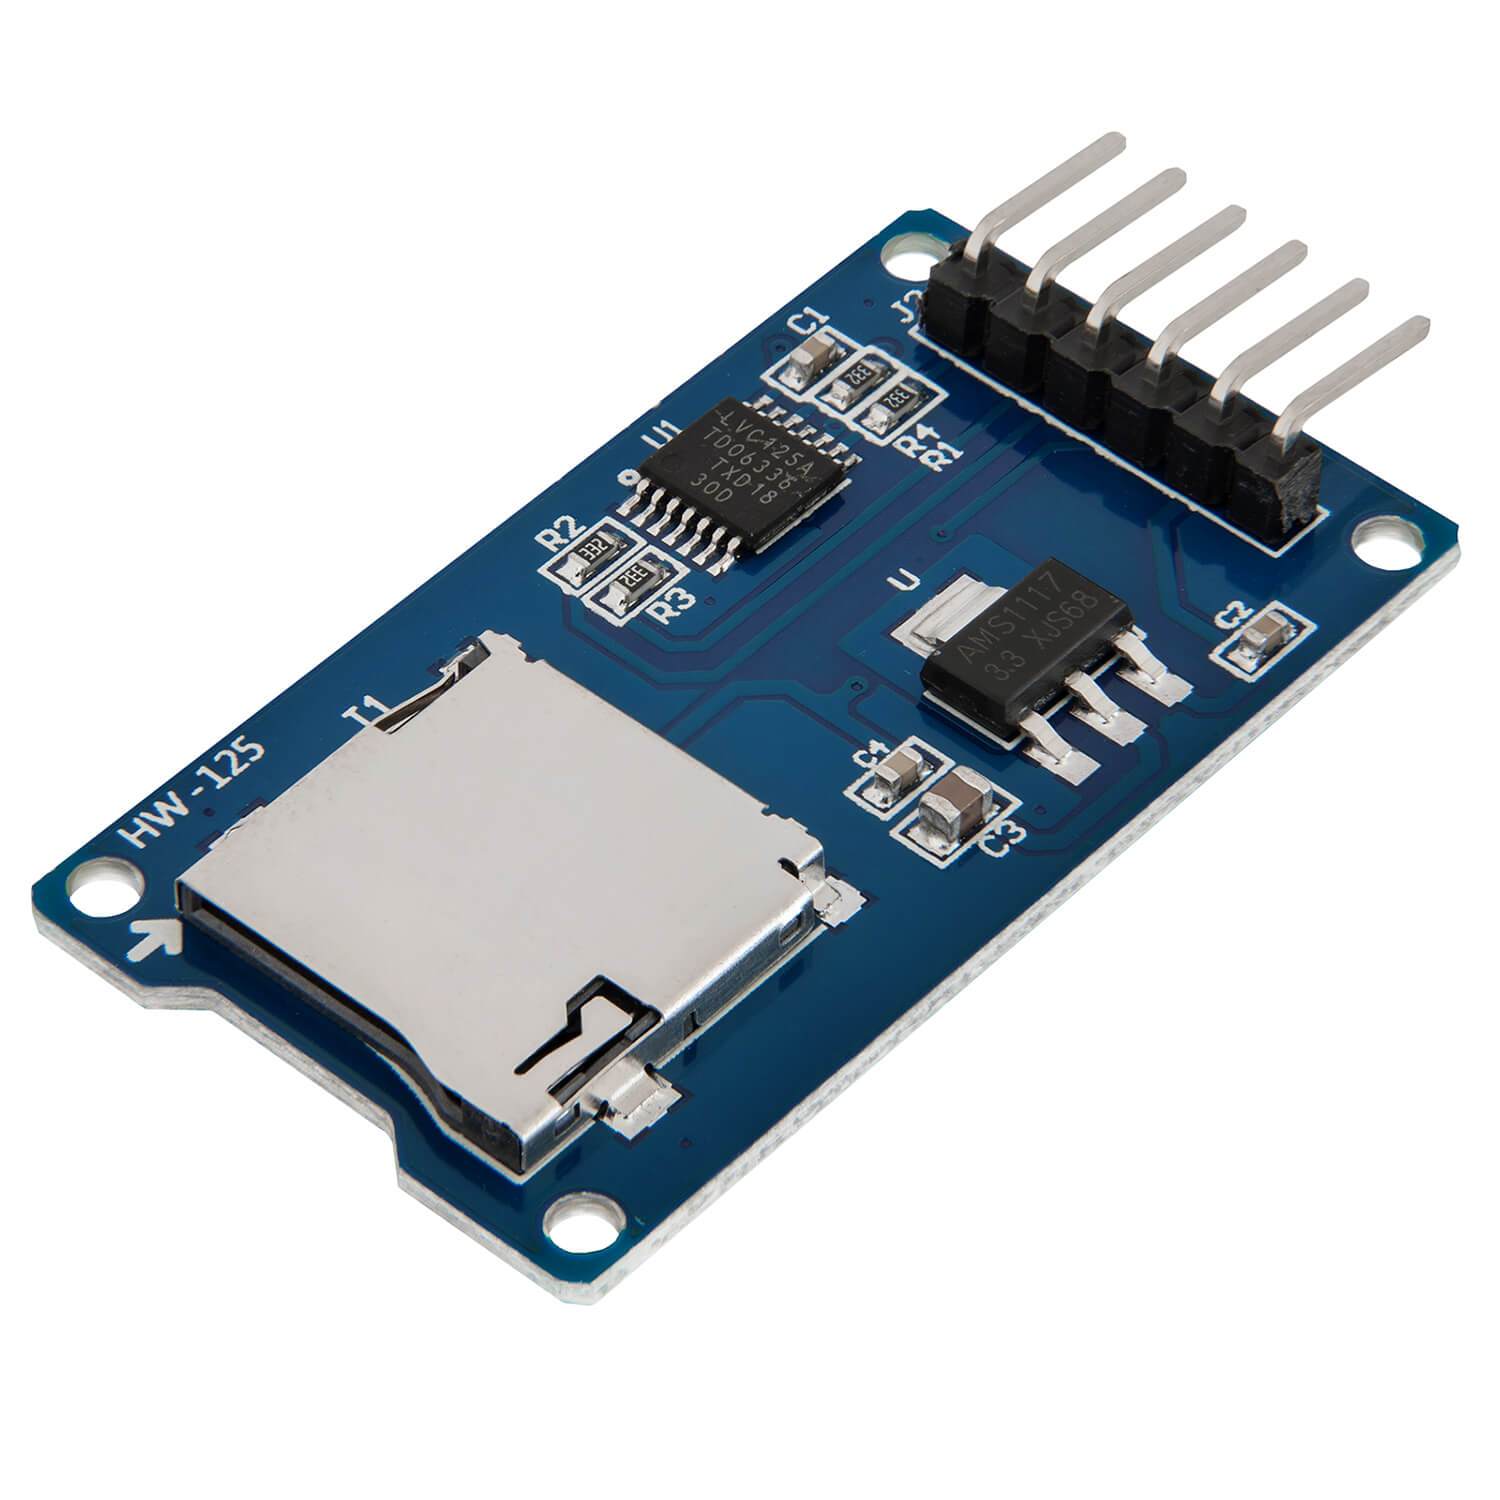 Looking for Spi SD card reader?